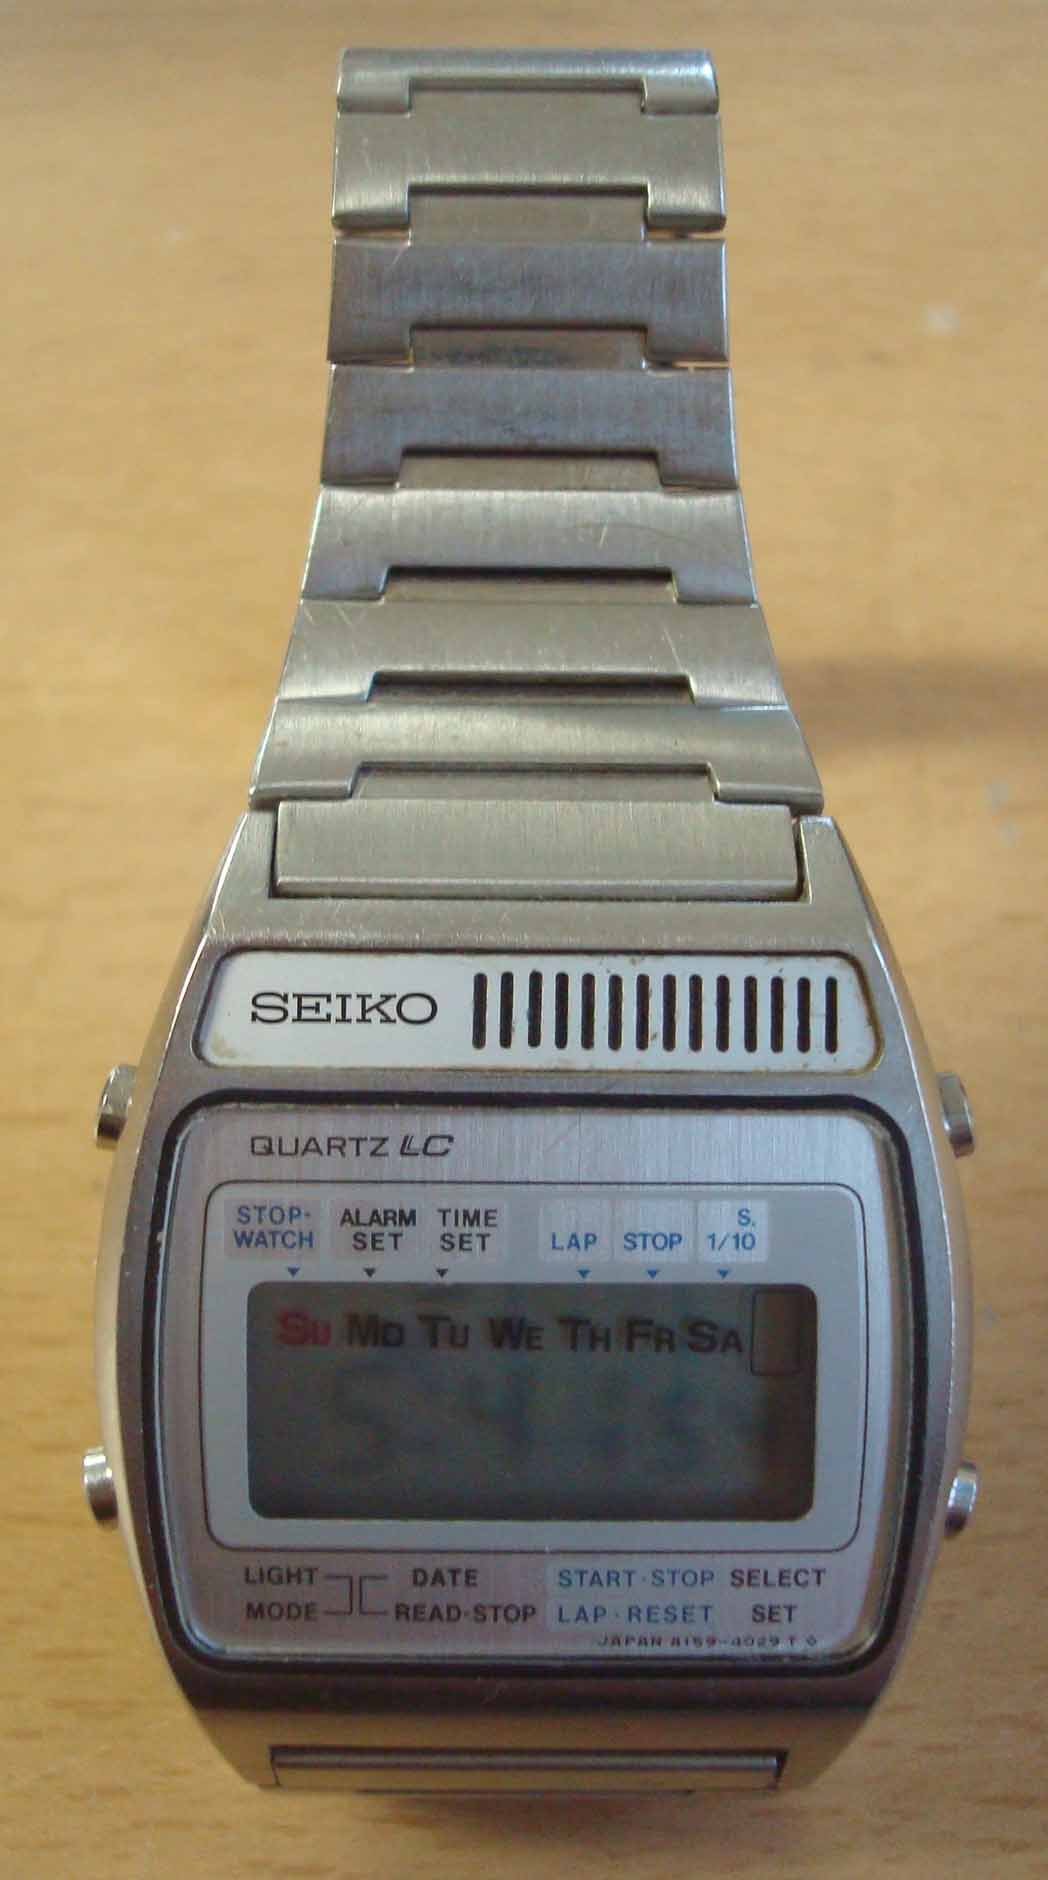 Vintage Seiko Quartz Lc Alarm Chronograph LCD Watch: Daily alarm. A nicely designed LCD panel. The